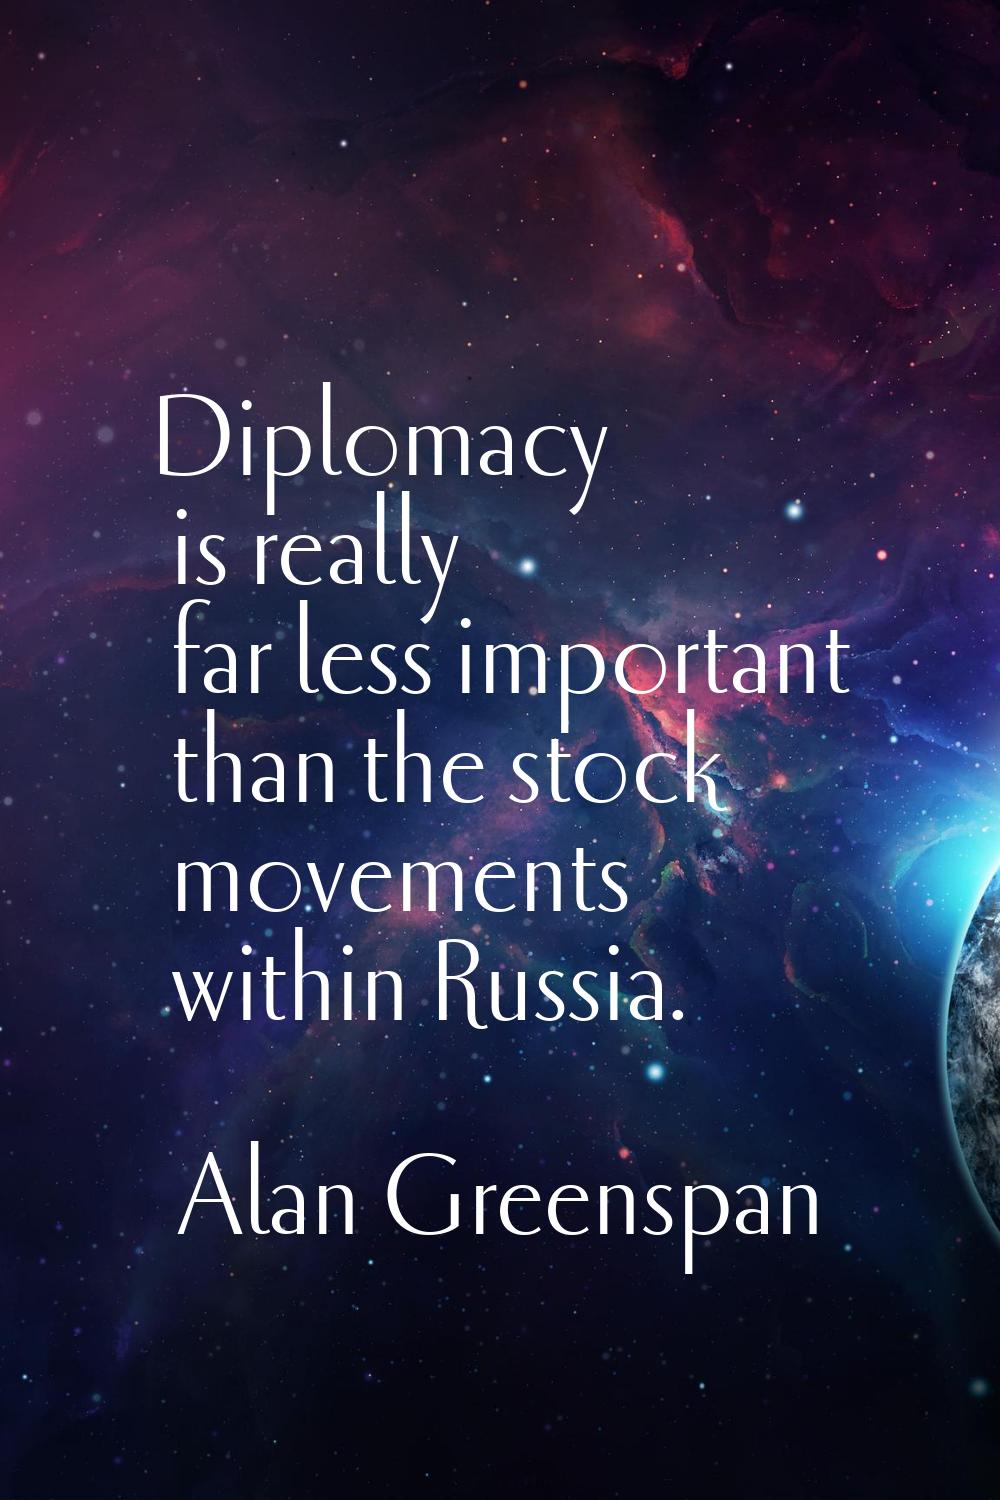 Diplomacy is really far less important than the stock movements within Russia.